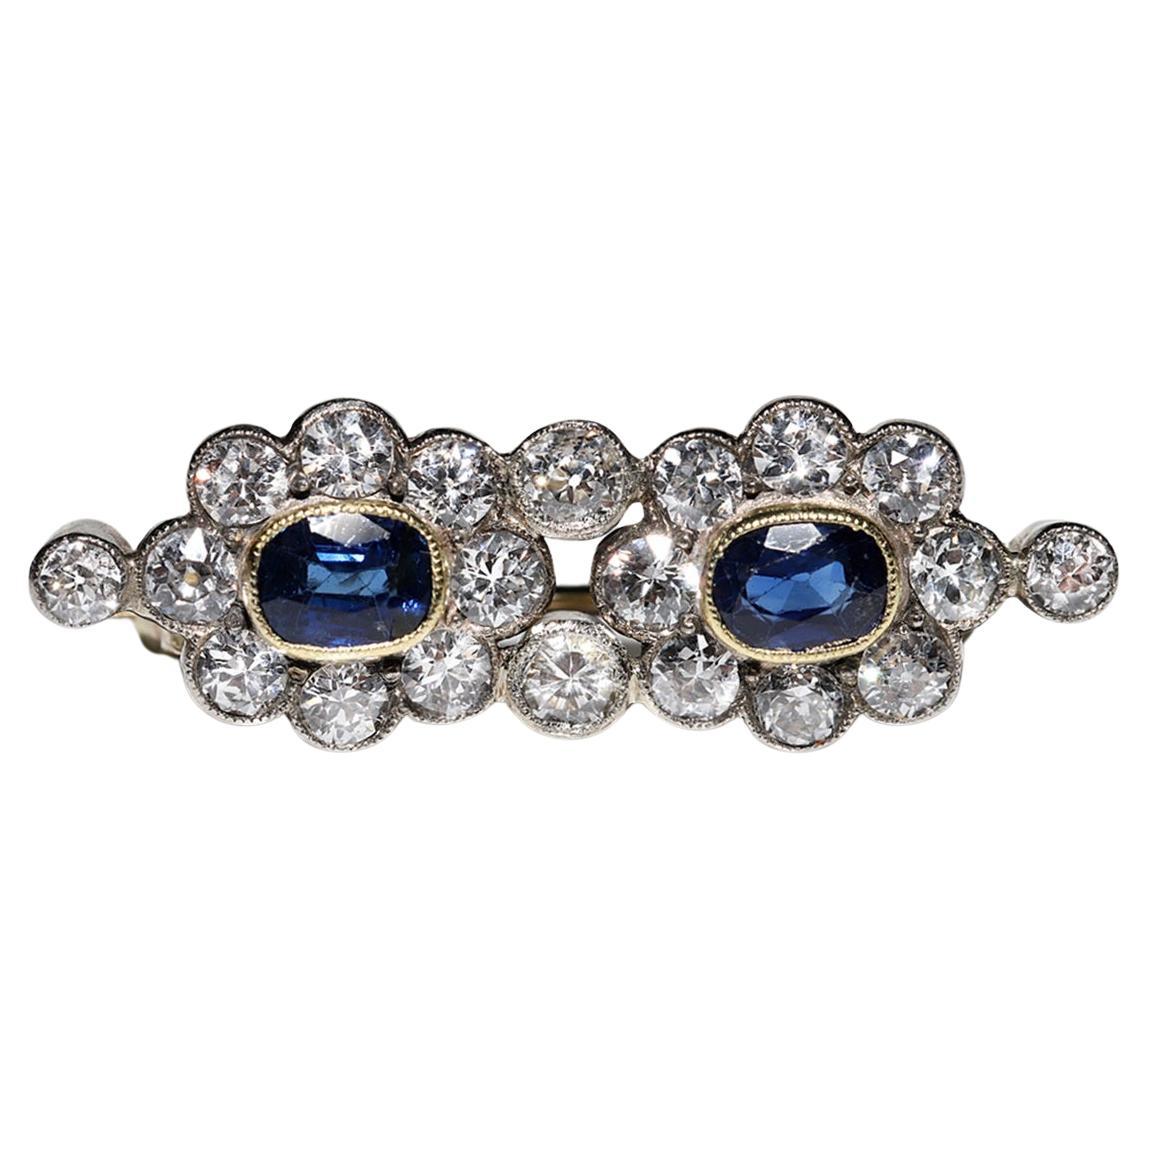 Antique Circa 1900s 14k Gold Natural Diamond And Sapphire Decorated Brooch